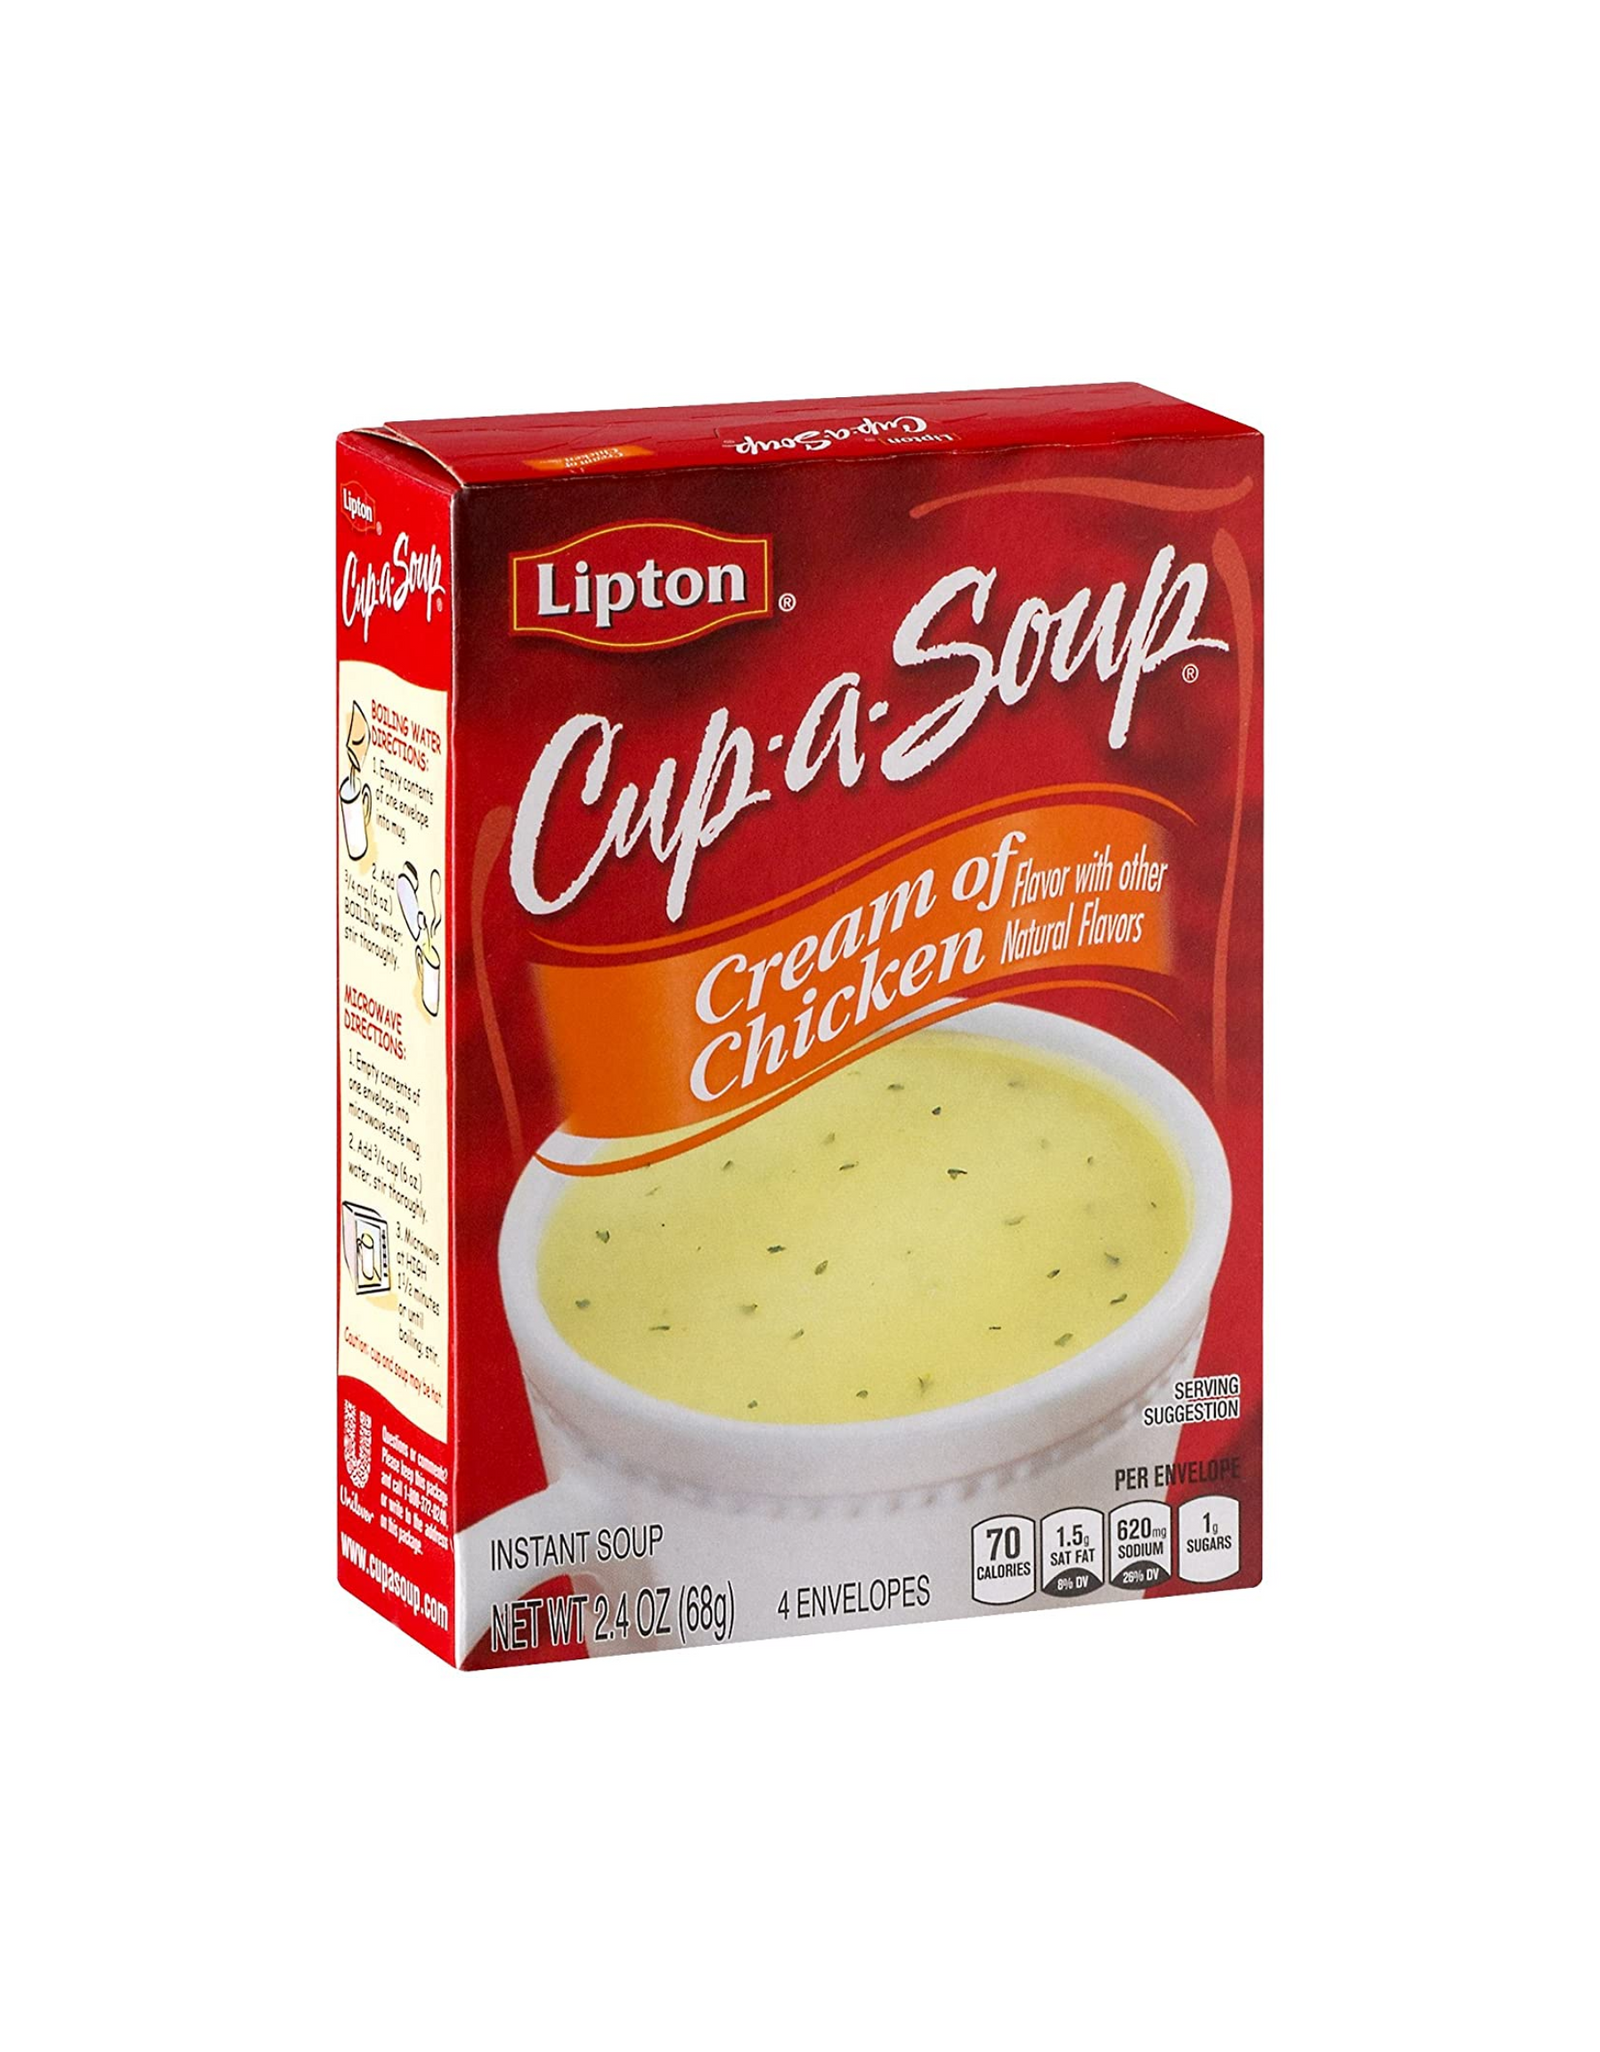 Lipton Cup-A-Soup Cream of Chicken, Instant Soup, 2.4 oz (Pack of 6)